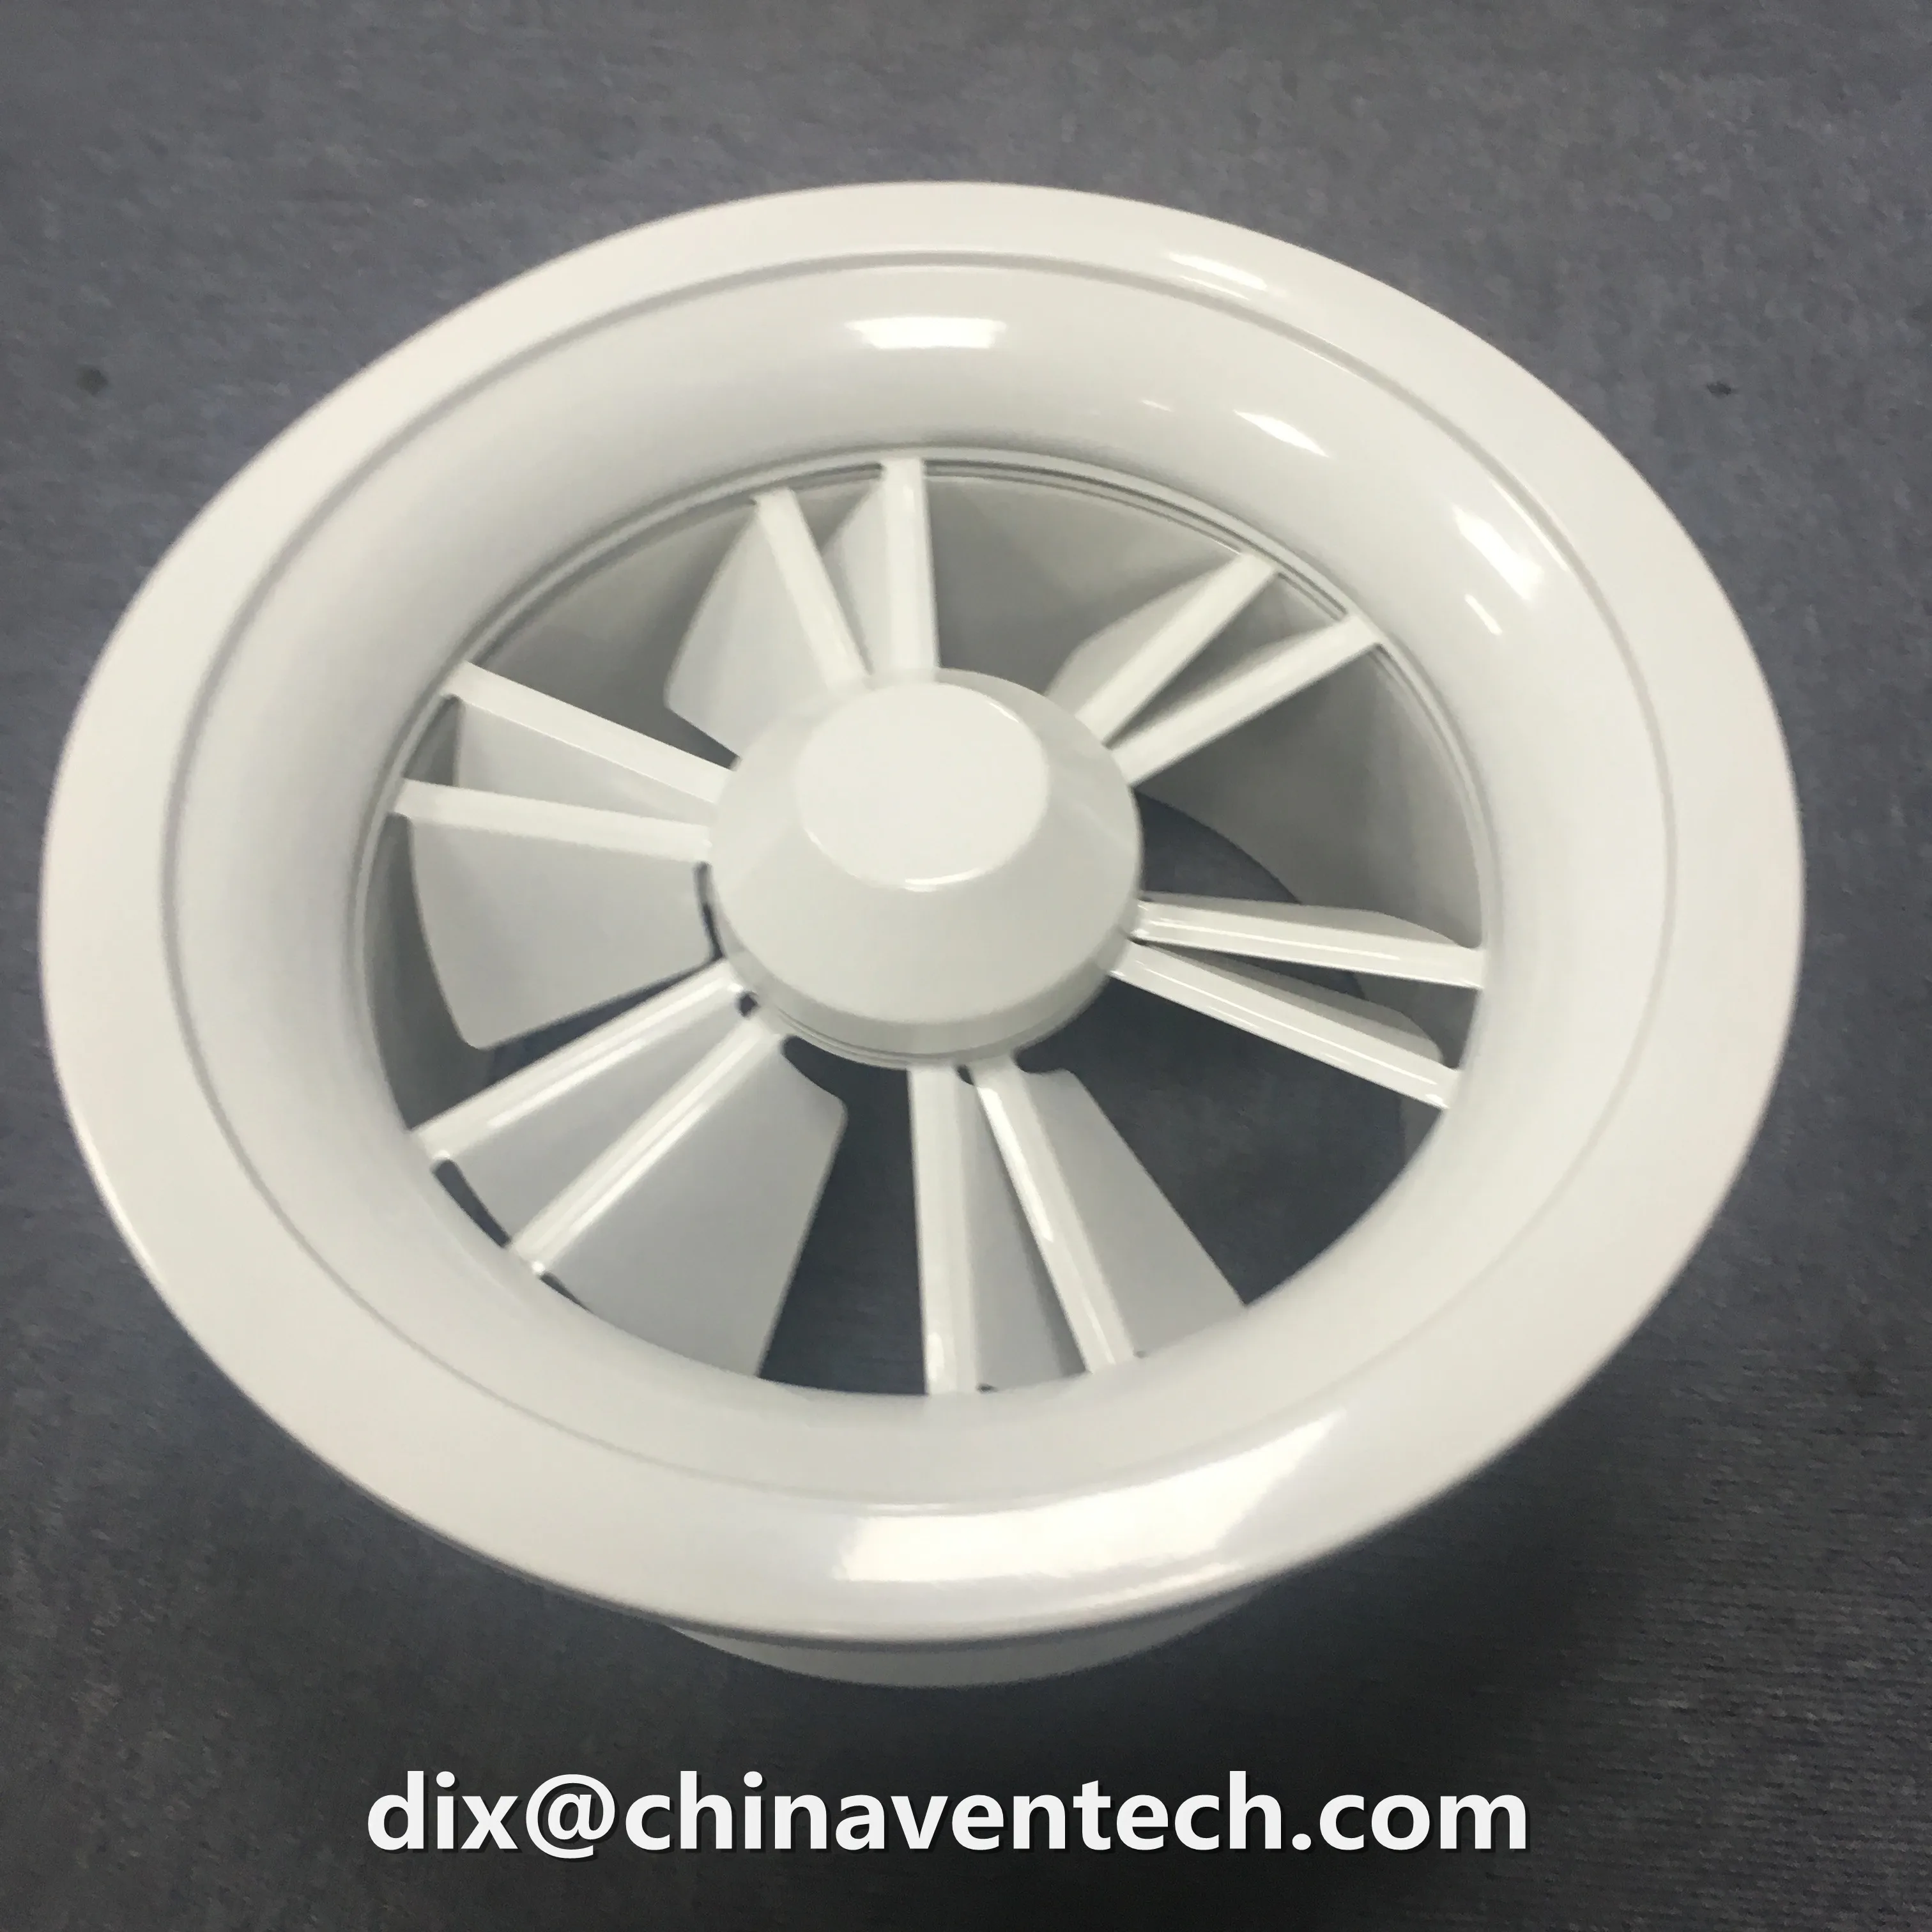 HVAC air diffusion product duct work mounted supply air round swirl diffuser